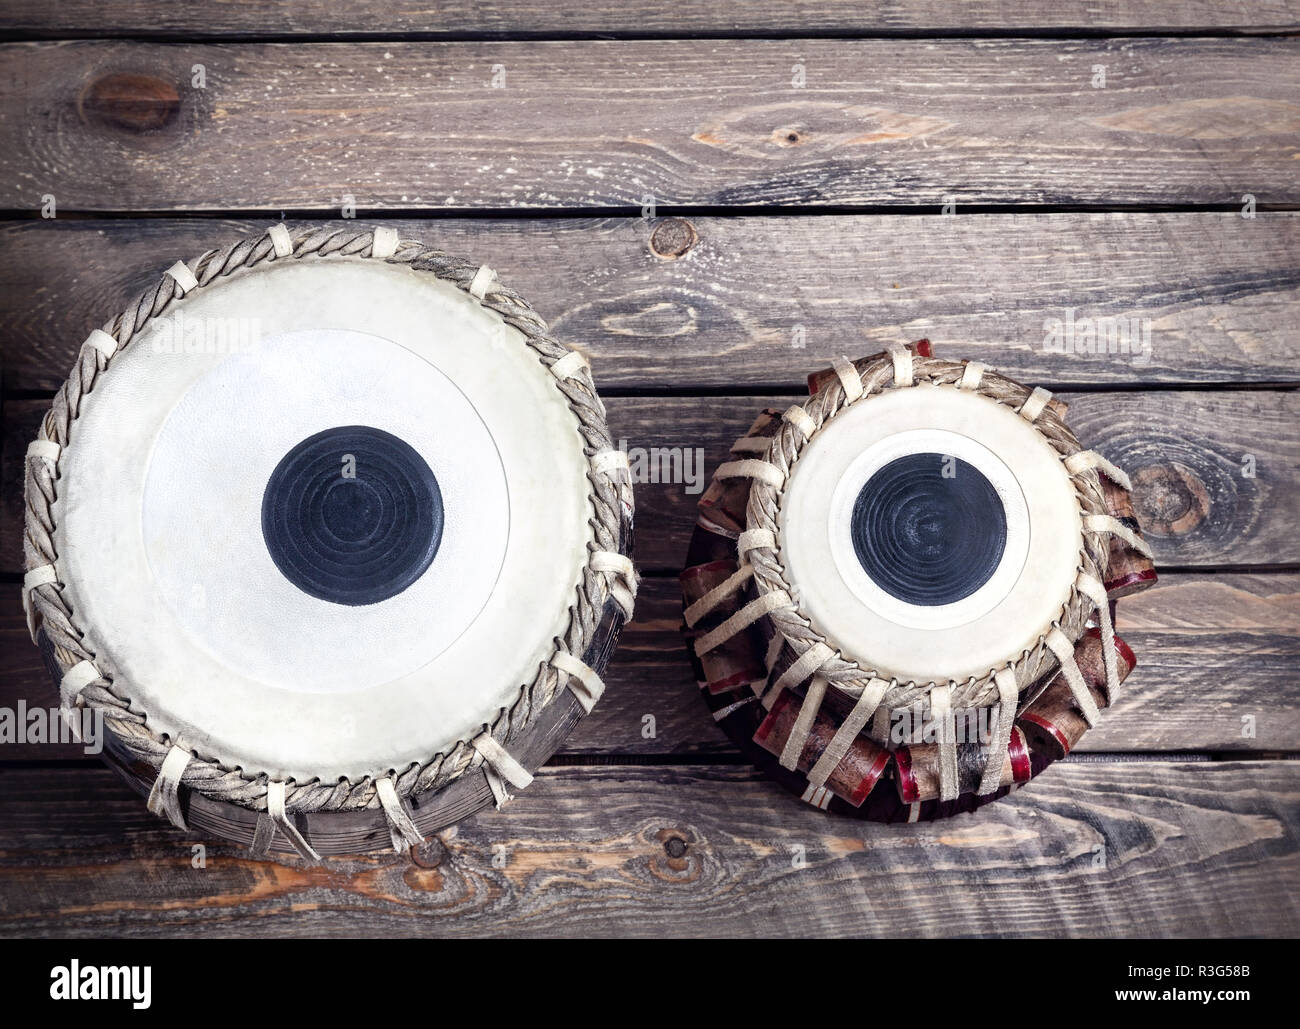 Tabla drums Indian classical music instrument close up Stock Photo